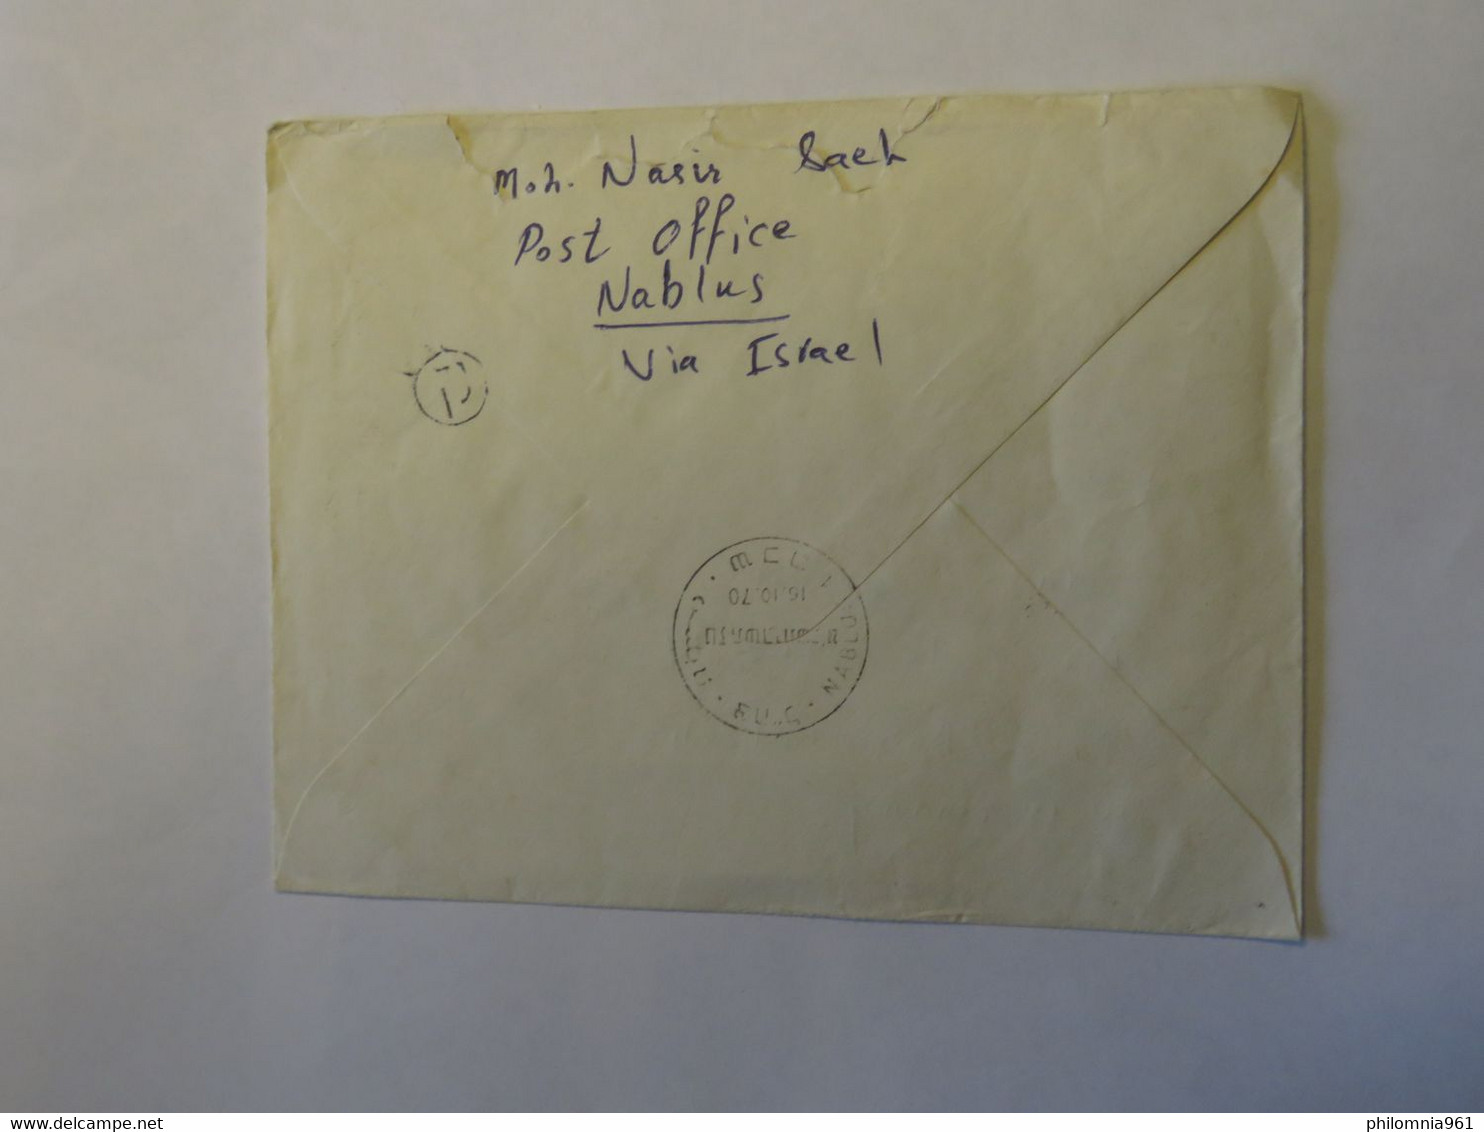 ISRAEL AIRMAIL COVER TO GERMANY 1970 - Usati (senza Tab)